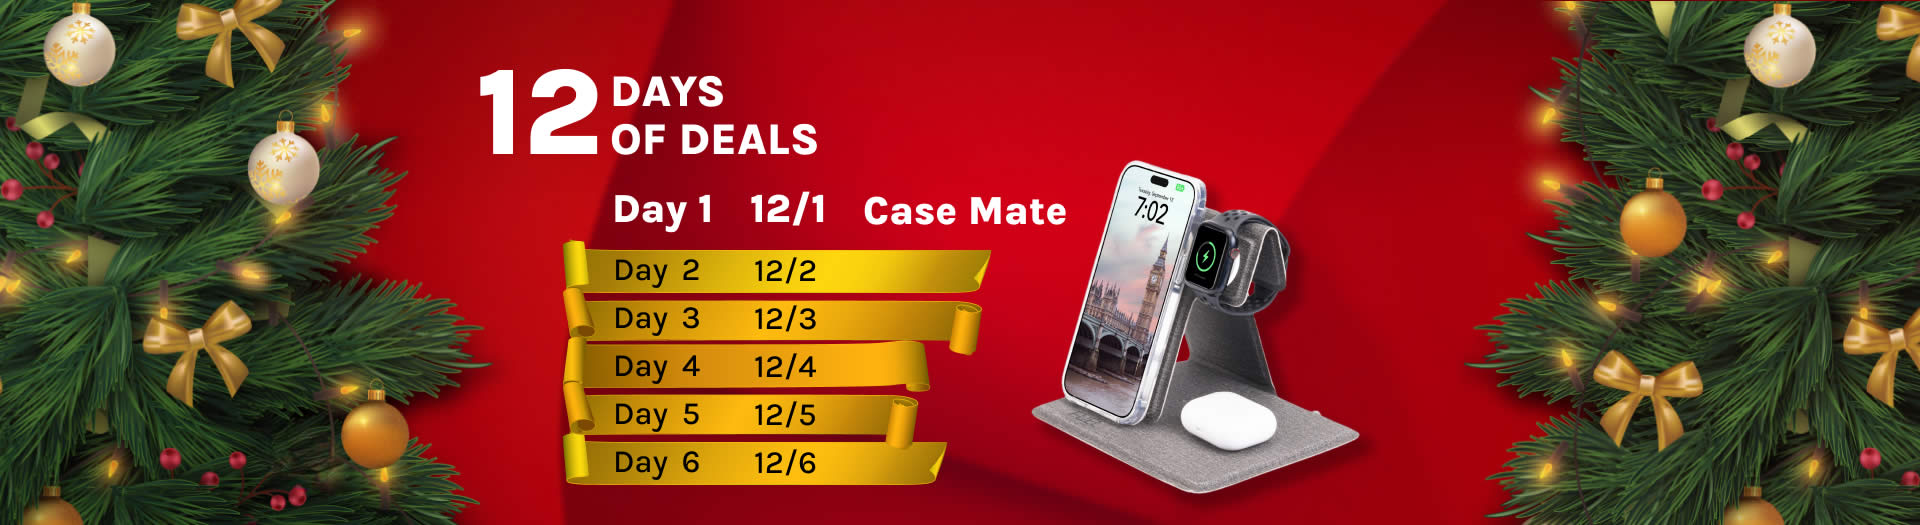 Case Mate 40% Off Sitewide